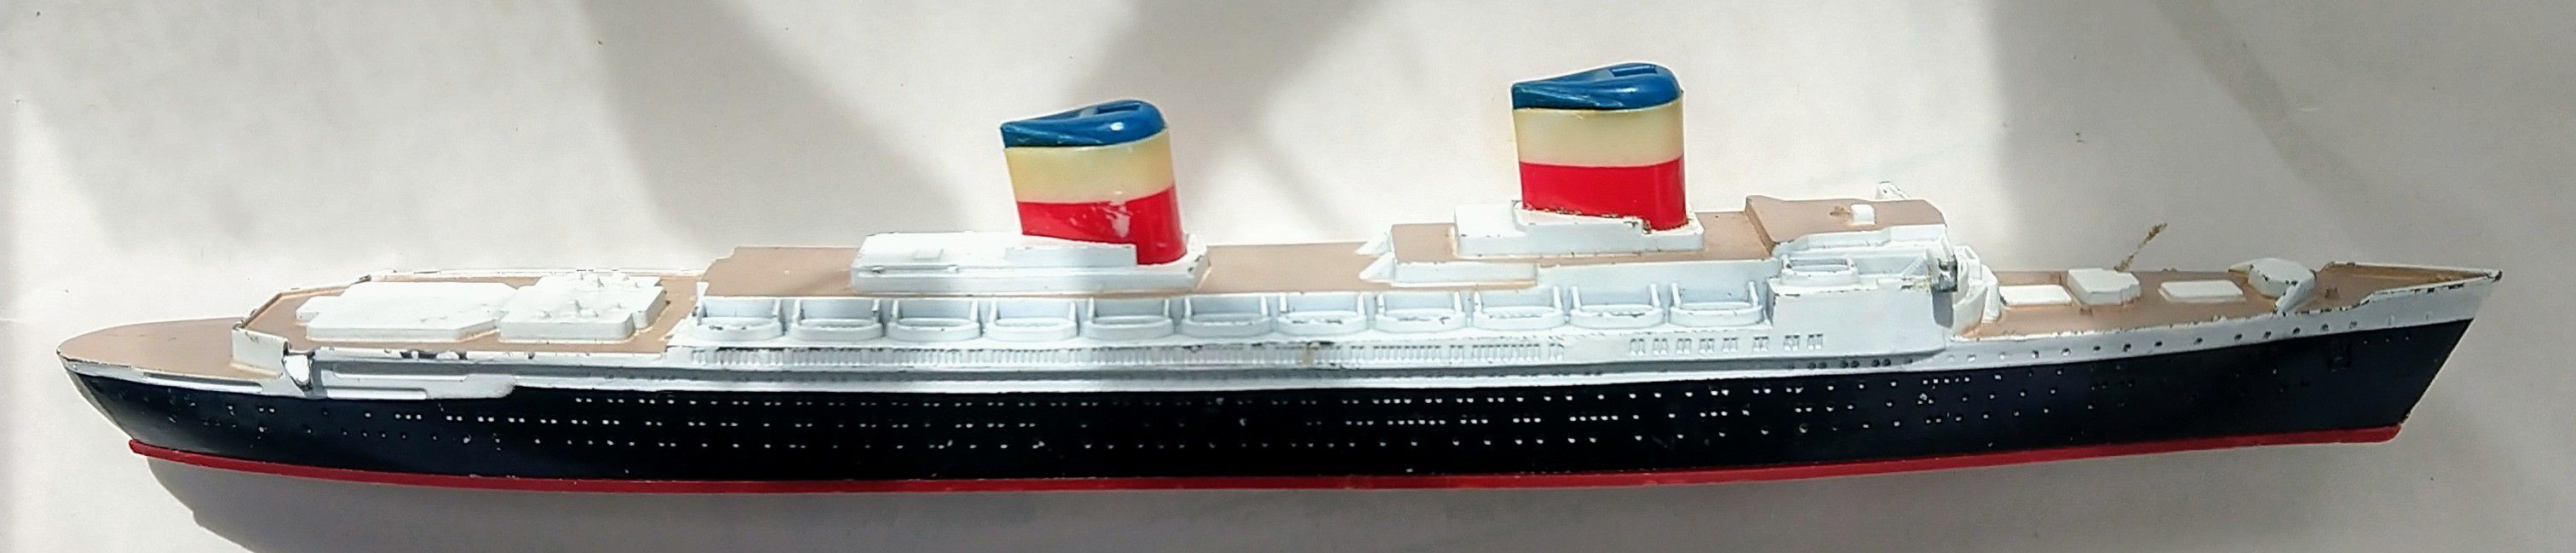 Cool Vintage Original Tri-ang Minic Ships M704 SS United States Ocean Liner In Seattle